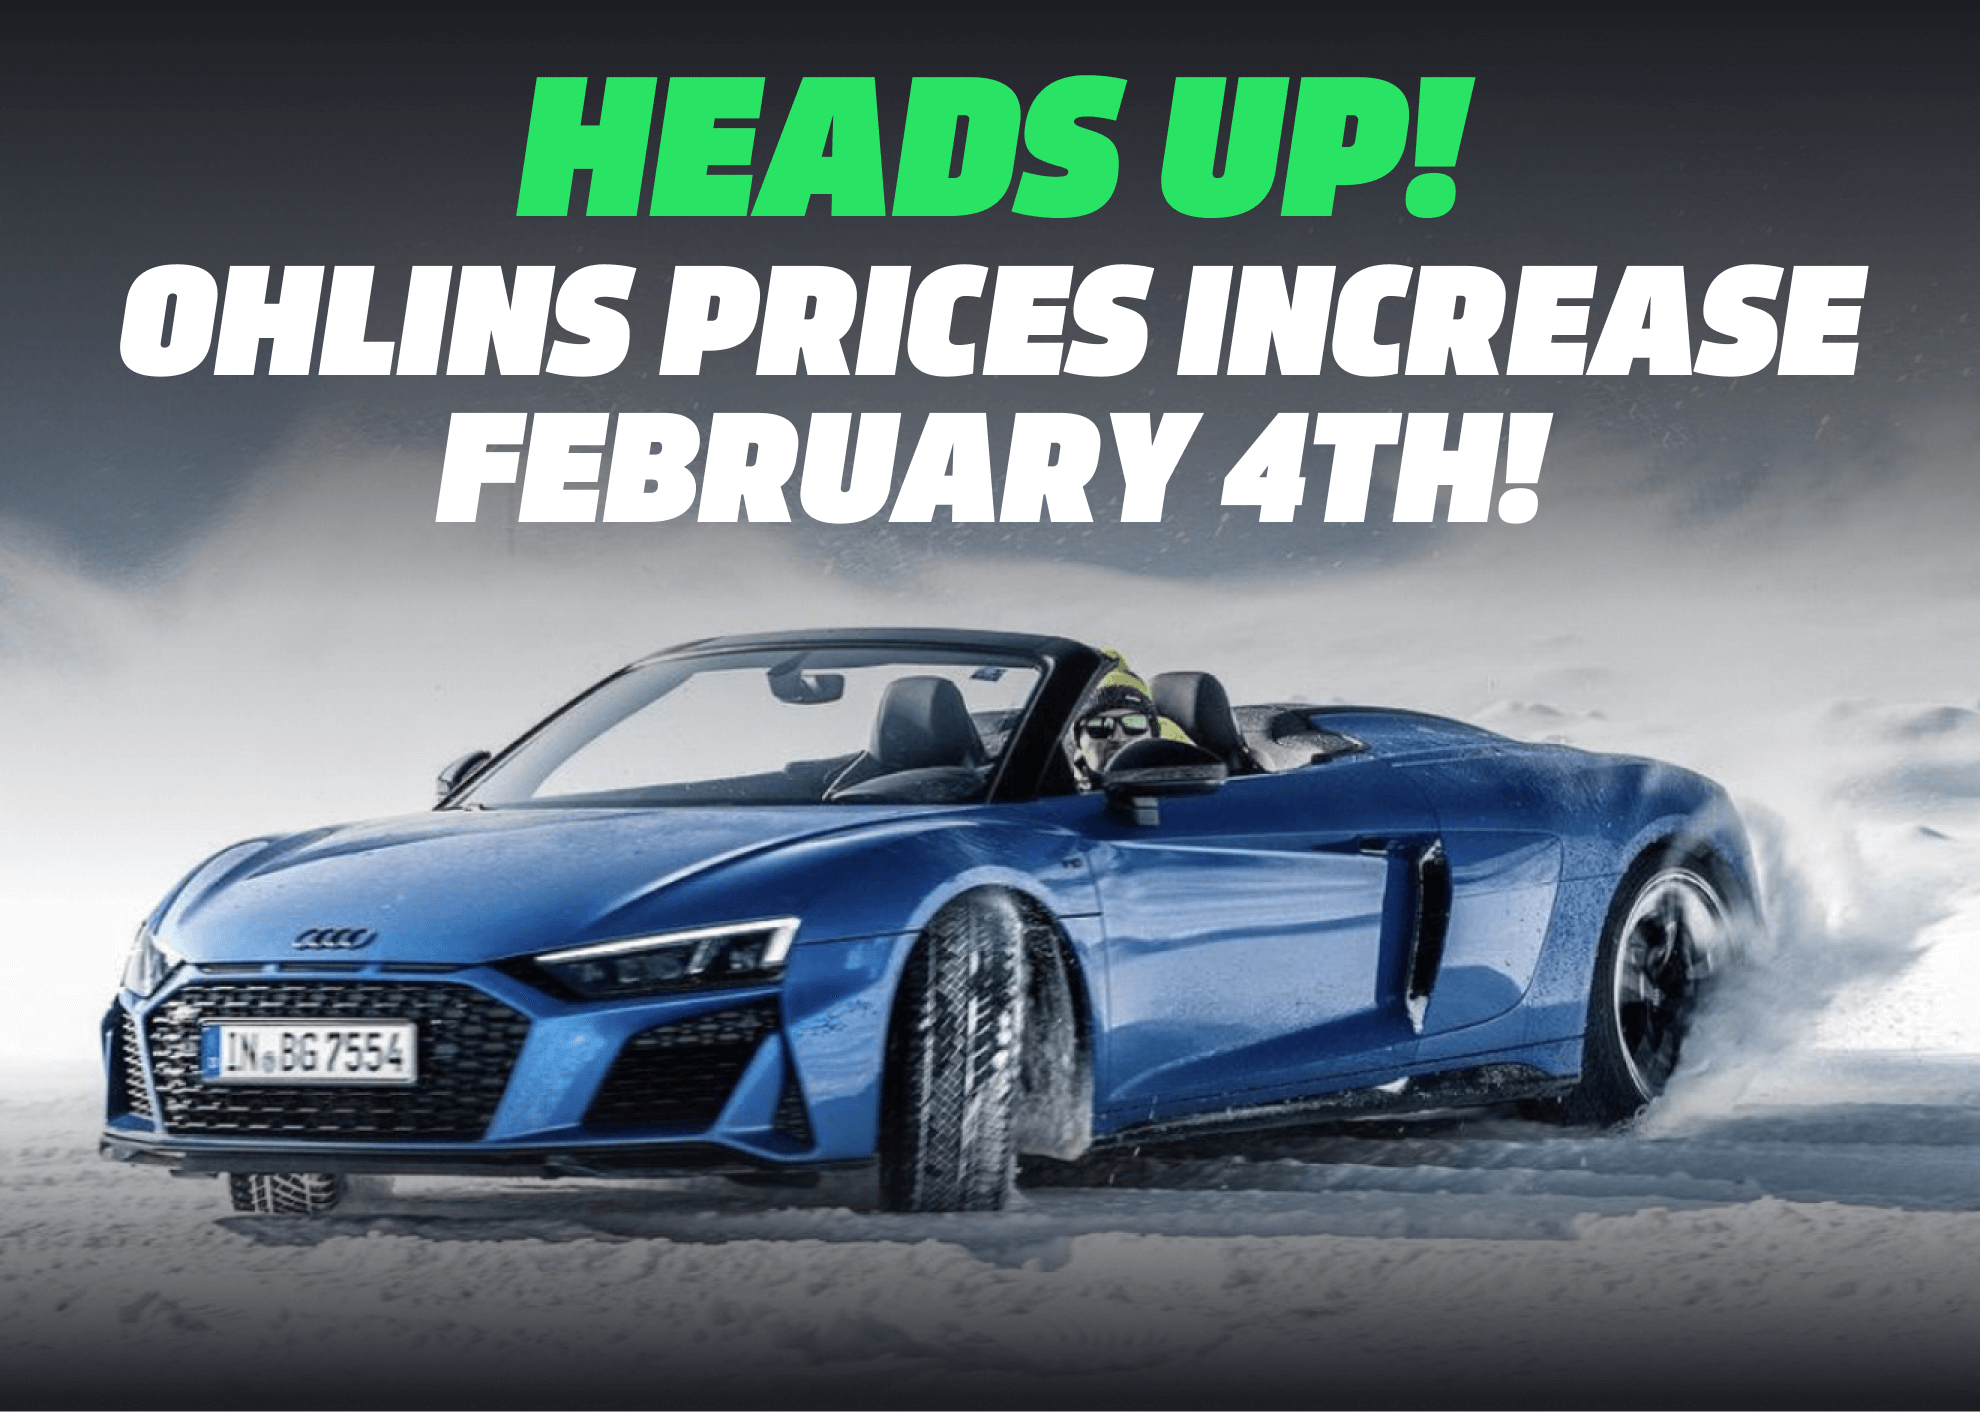 Heads Up! Ohlins Prices Increase February 4th!